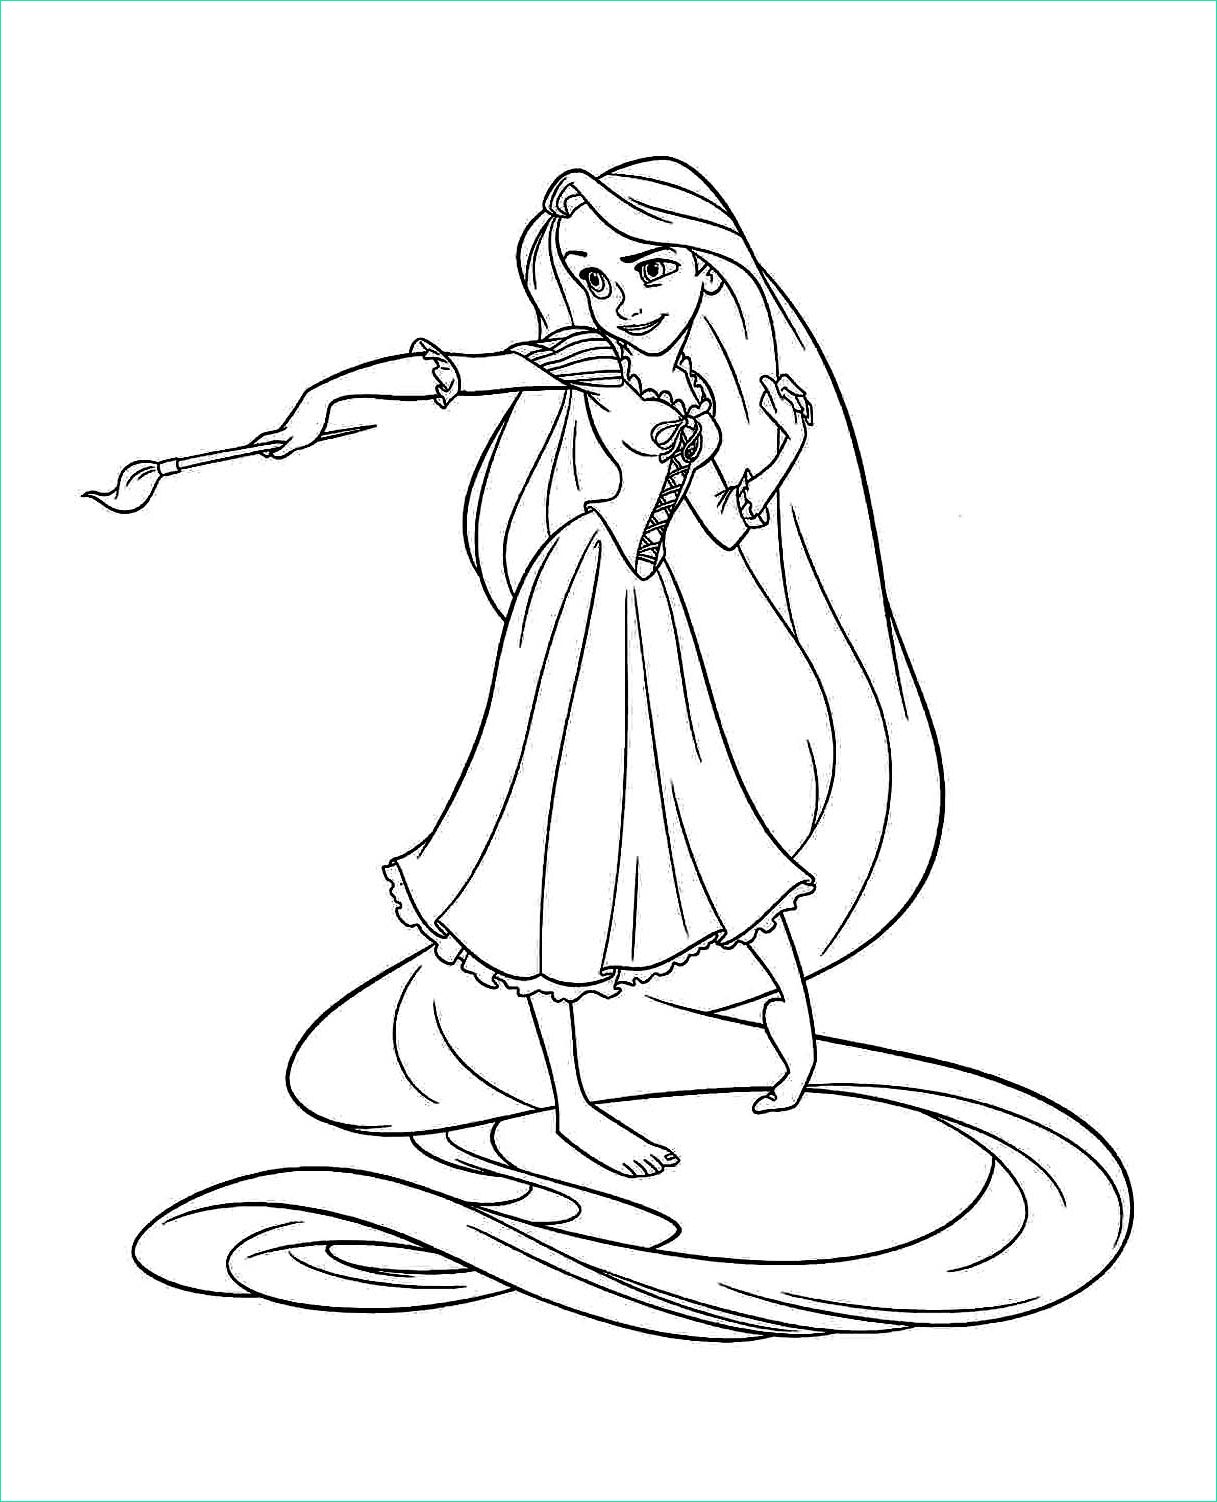 image=tangled Coloring for kids tangled 8609 1